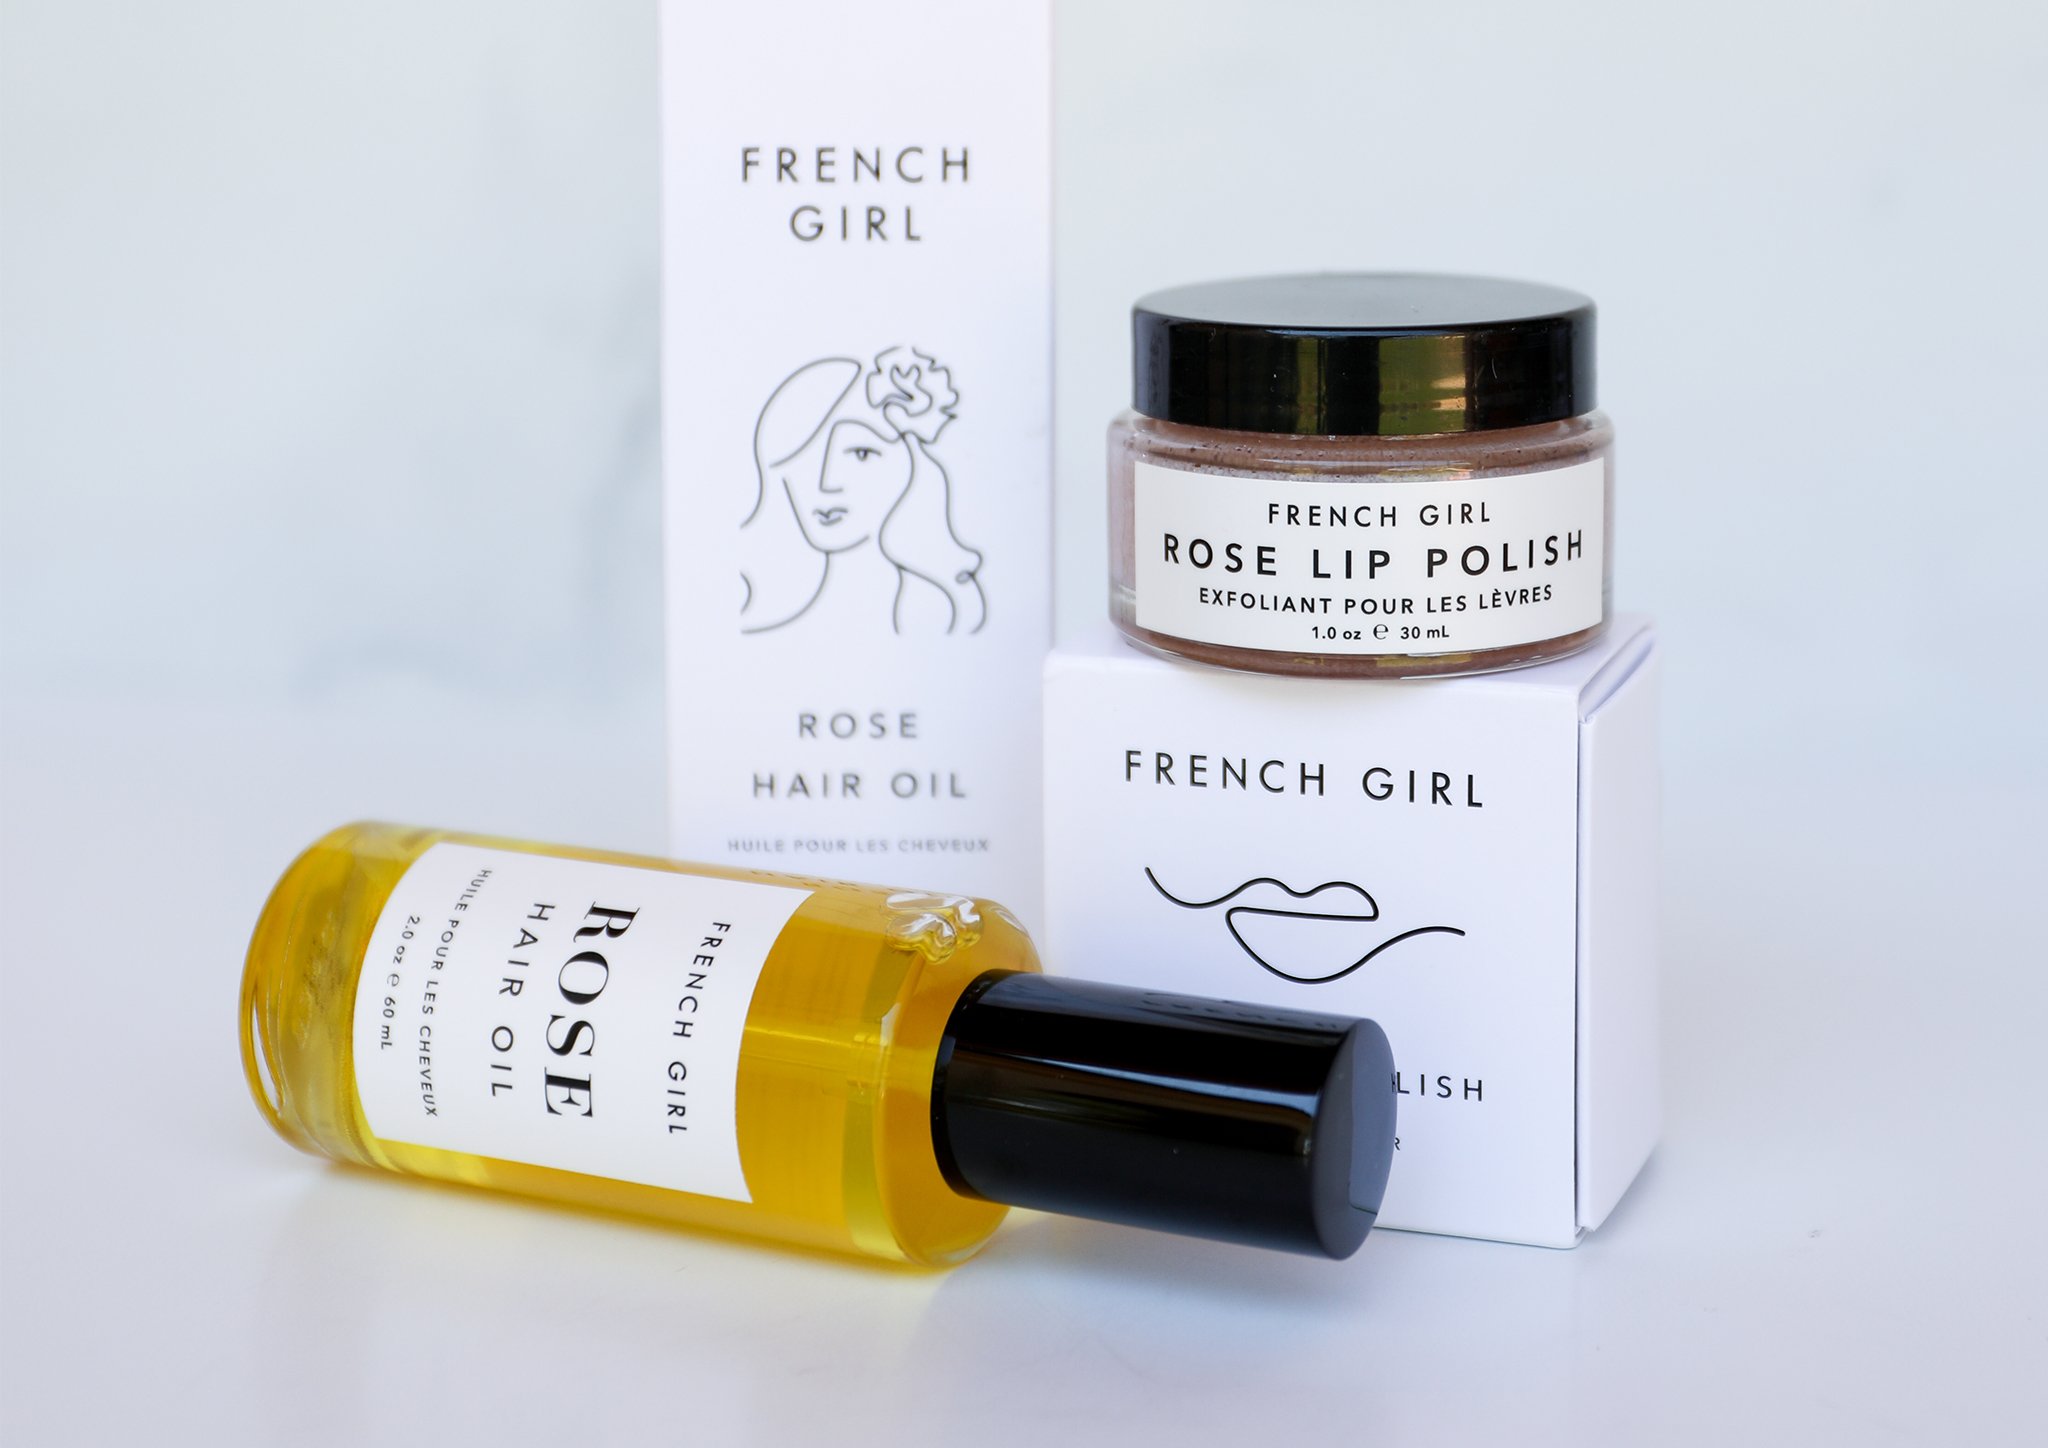 Assorted beauty and skincare products from French Girl organics brand